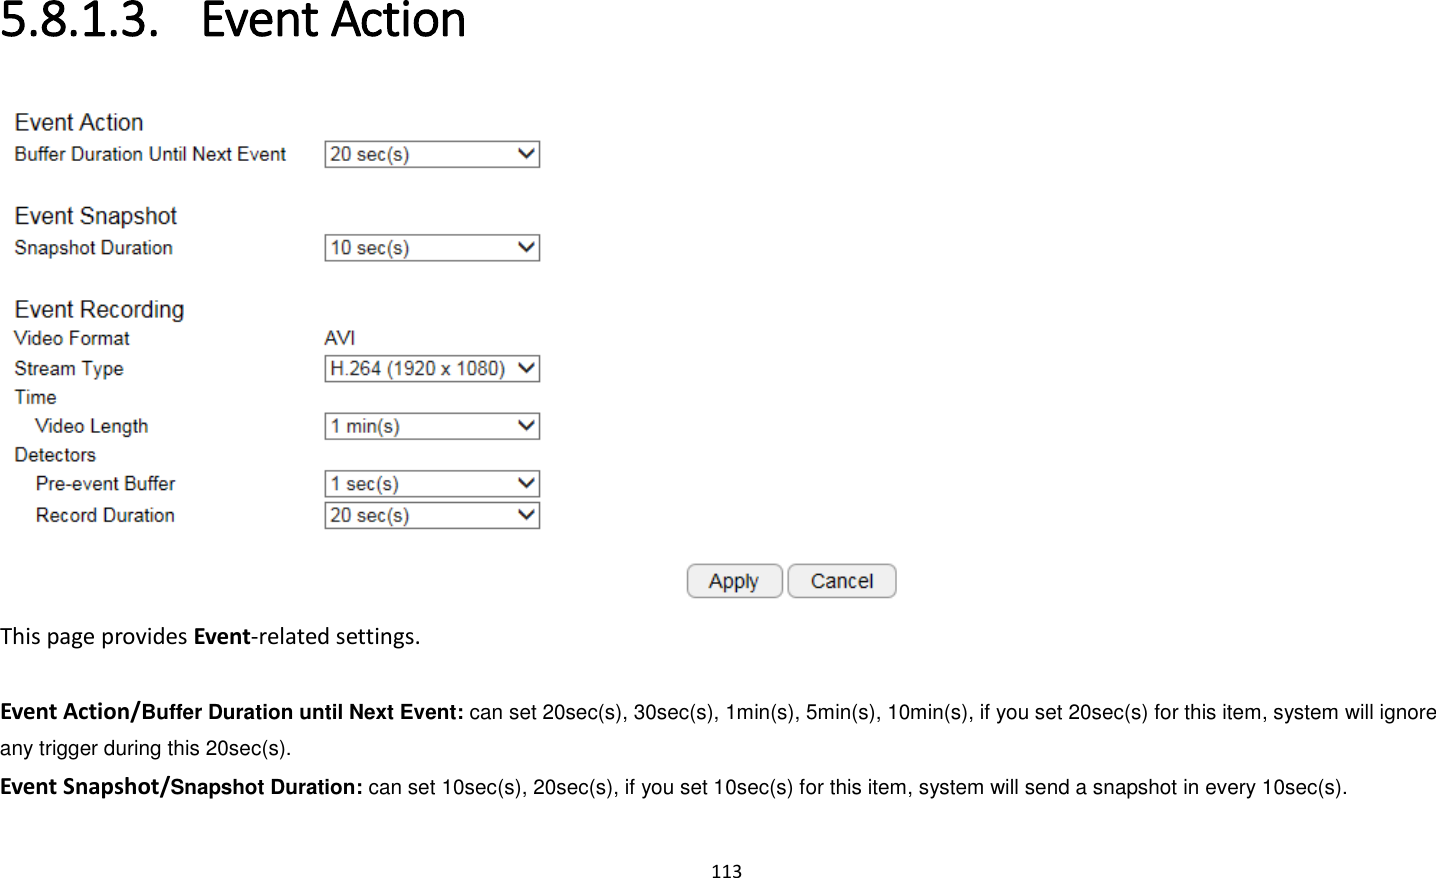 113  5.8.1.3. Event Action  This page provides Event-related settings.  Event Action/Buffer Duration until Next Event: can set 20sec(s), 30sec(s), 1min(s), 5min(s), 10min(s), if you set 20sec(s) for this item, system will ignore any trigger during this 20sec(s). Event Snapshot/Snapshot Duration: can set 10sec(s), 20sec(s), if you set 10sec(s) for this item, system will send a snapshot in every 10sec(s). 